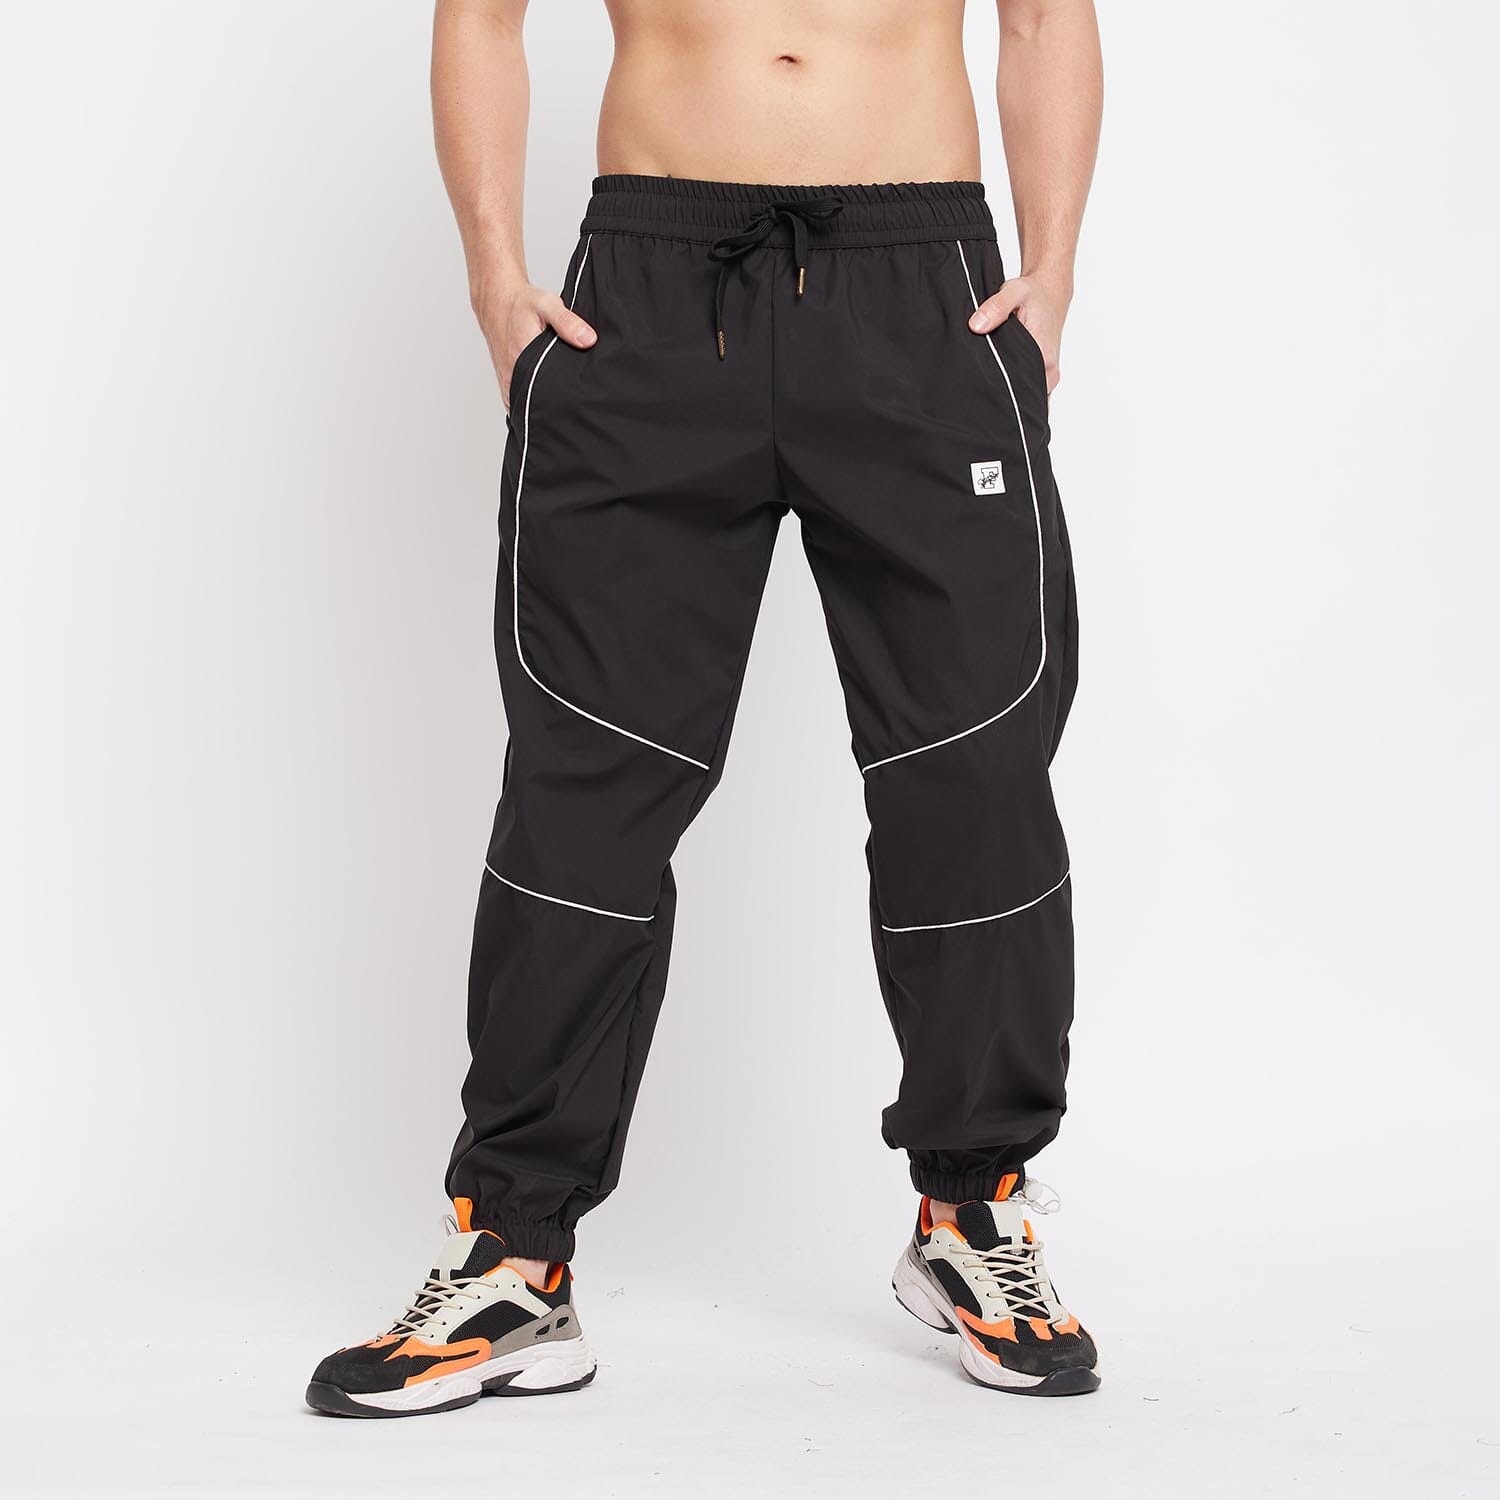 S Polyester Men Grey Gym Track Pant at Rs 250/piece in Faridabad | ID:  20596661273